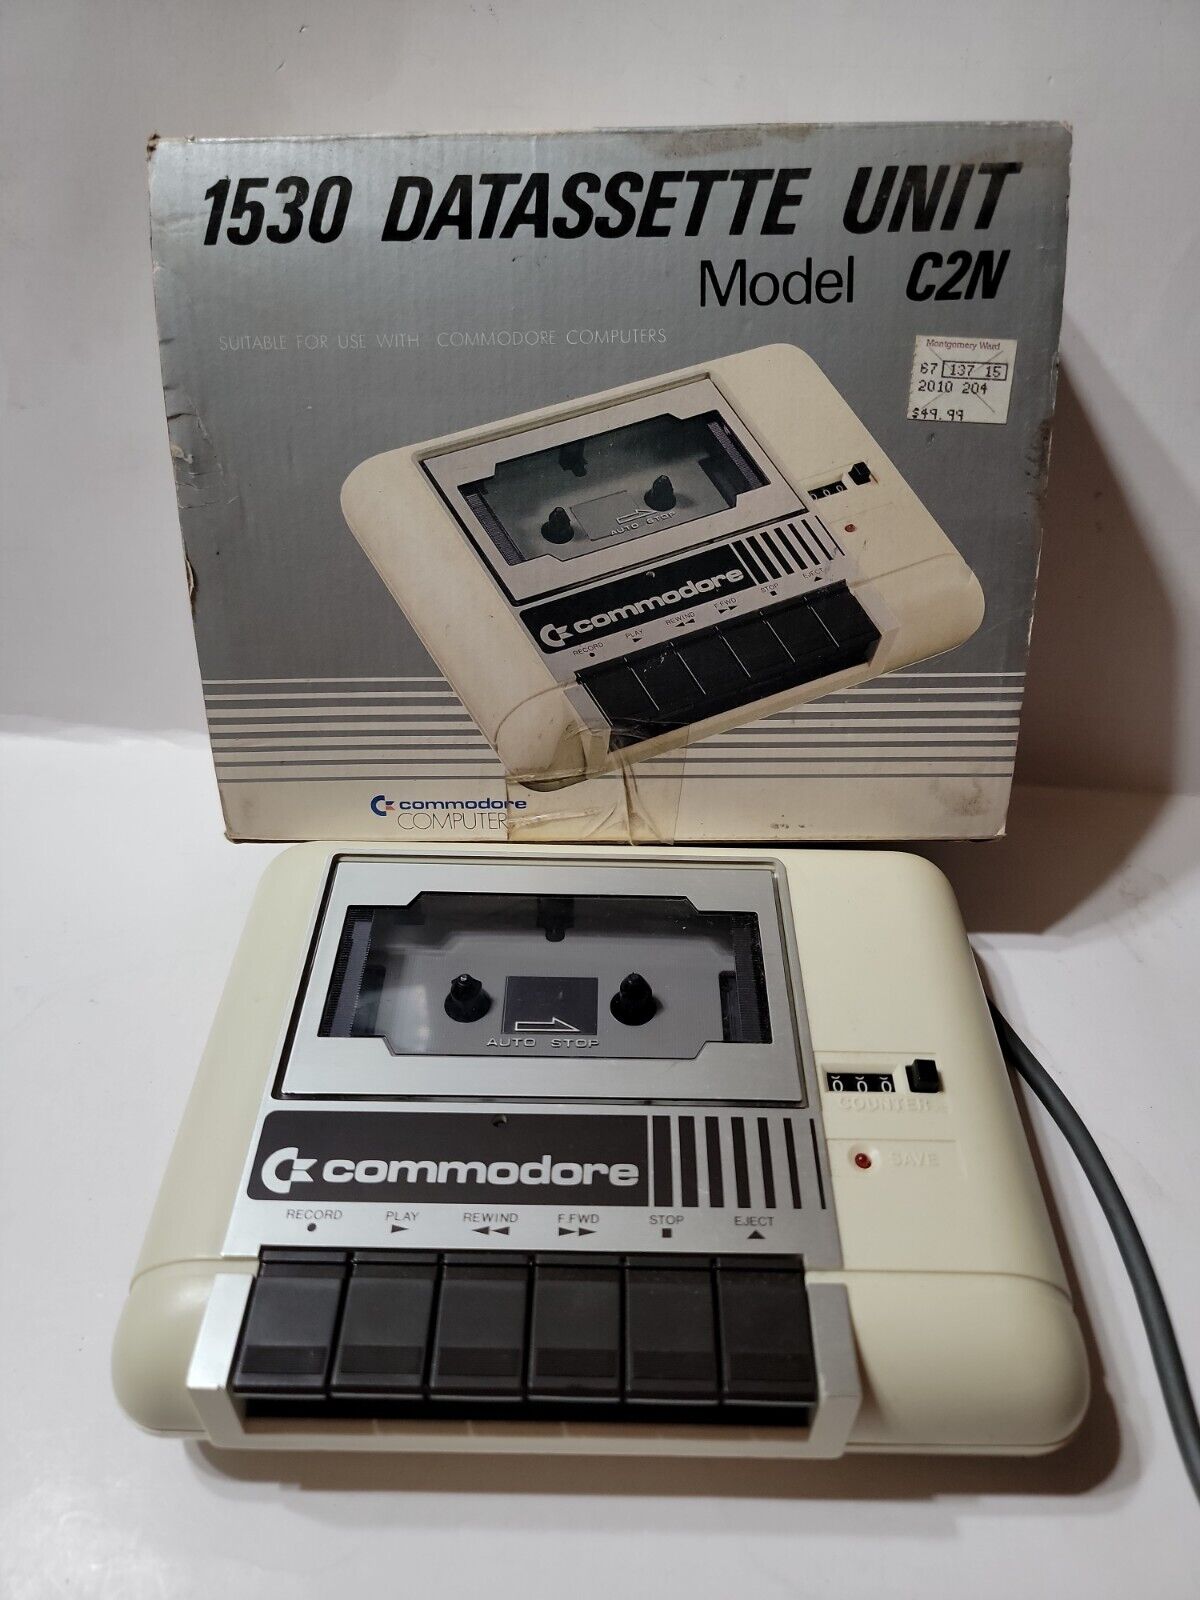 Commodore Computer 1530 Datassette Unit Model C2N Cassette with Box - Untested